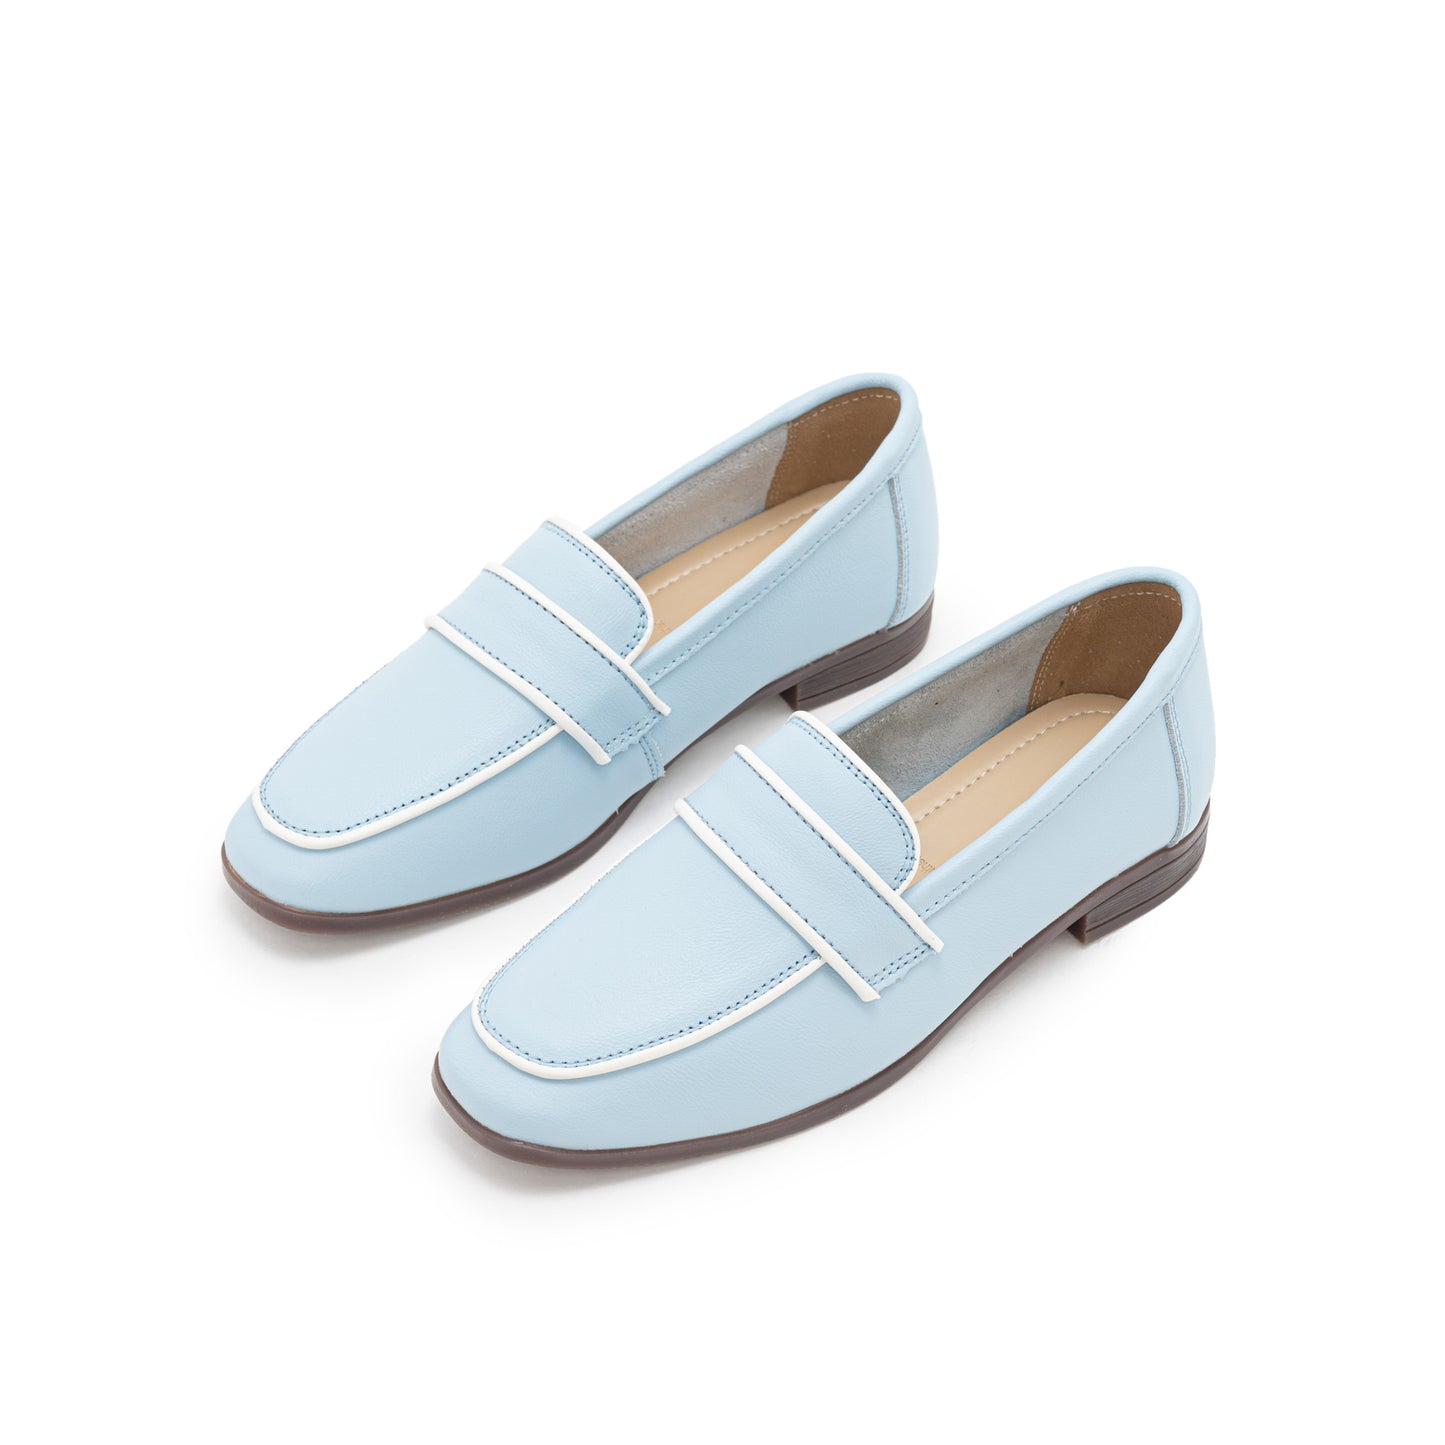 Hermione Loafer Shoes